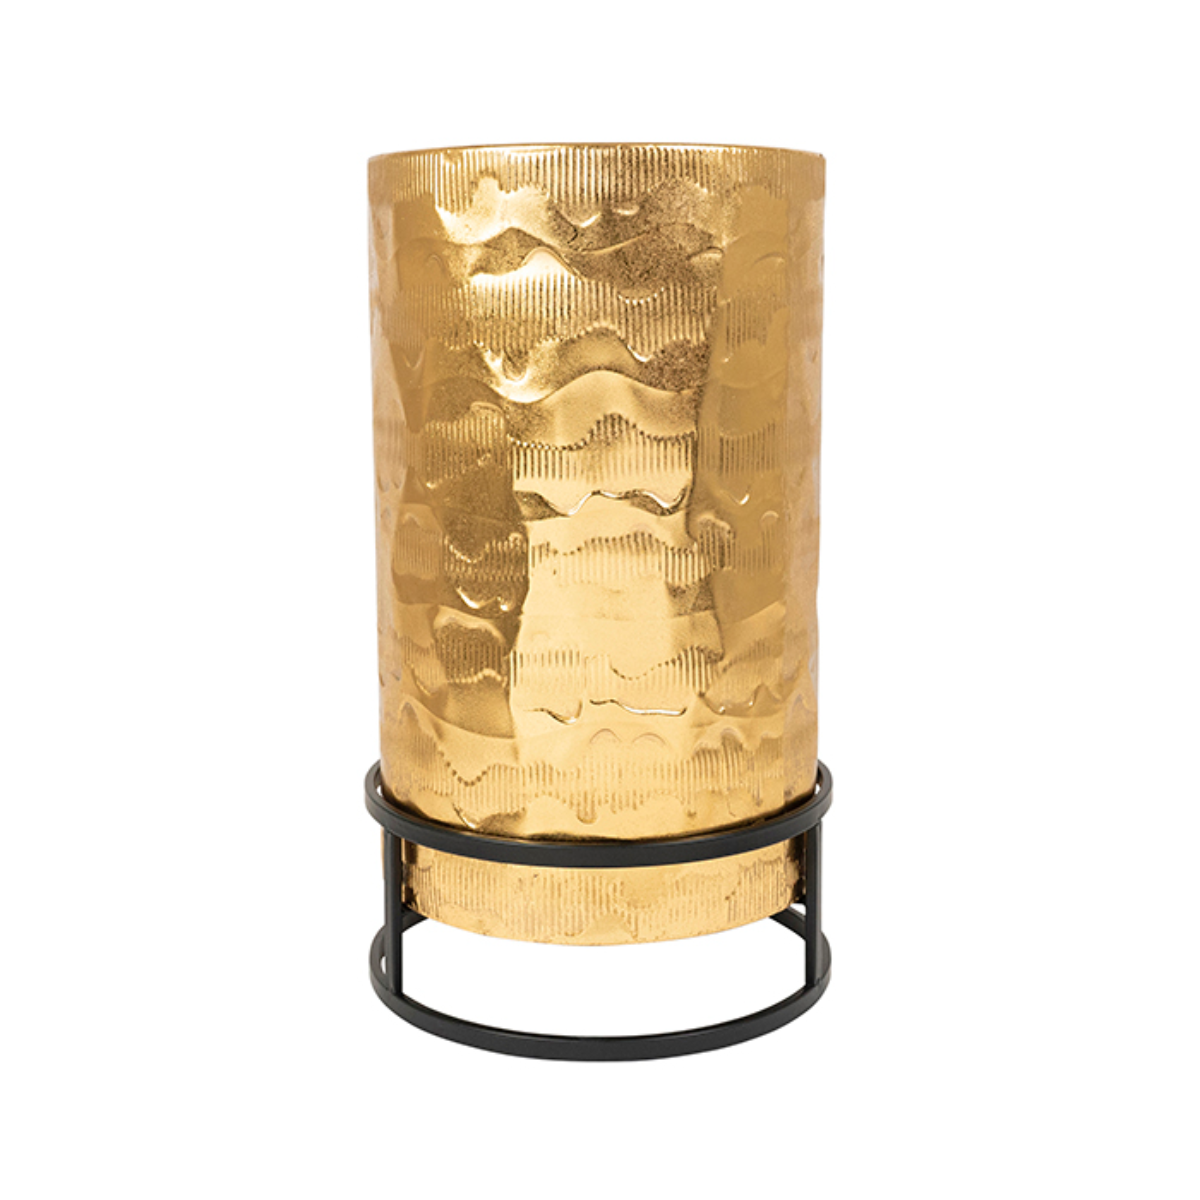 Black and Gold Metal Planter/Hurricane Lamp - Small